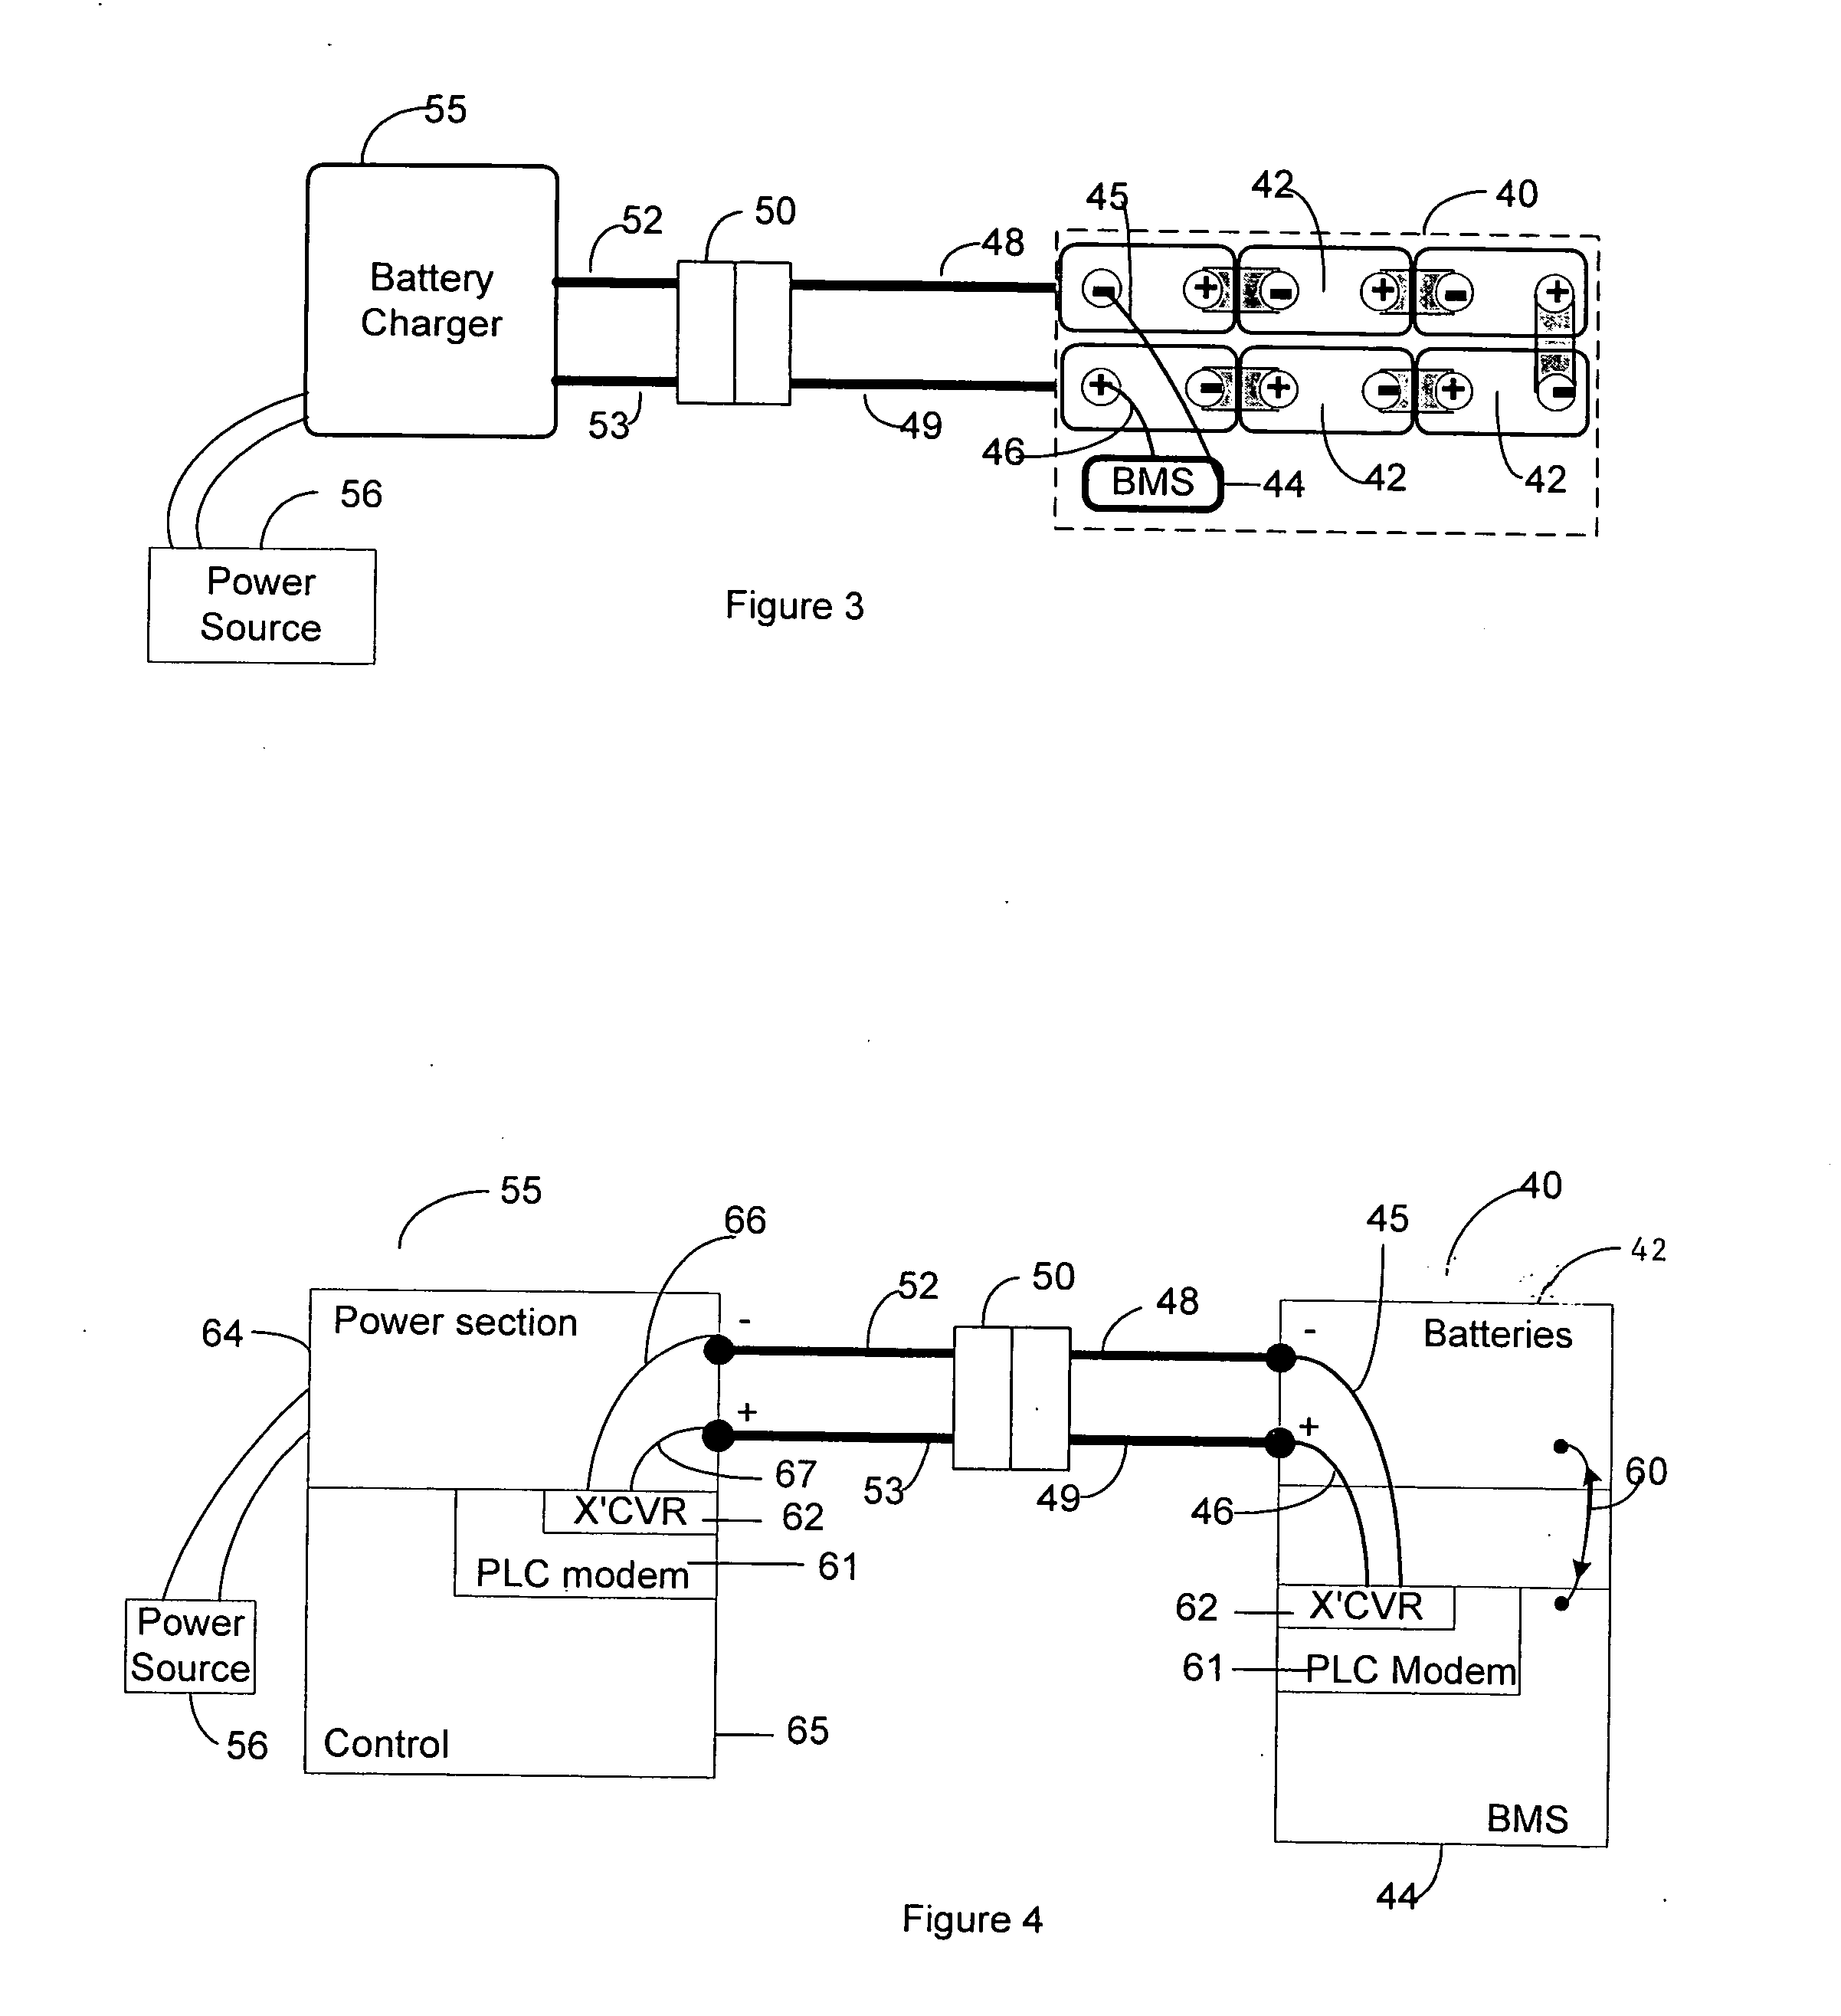 Battery management and equalization system for batteries using power line carrier communications